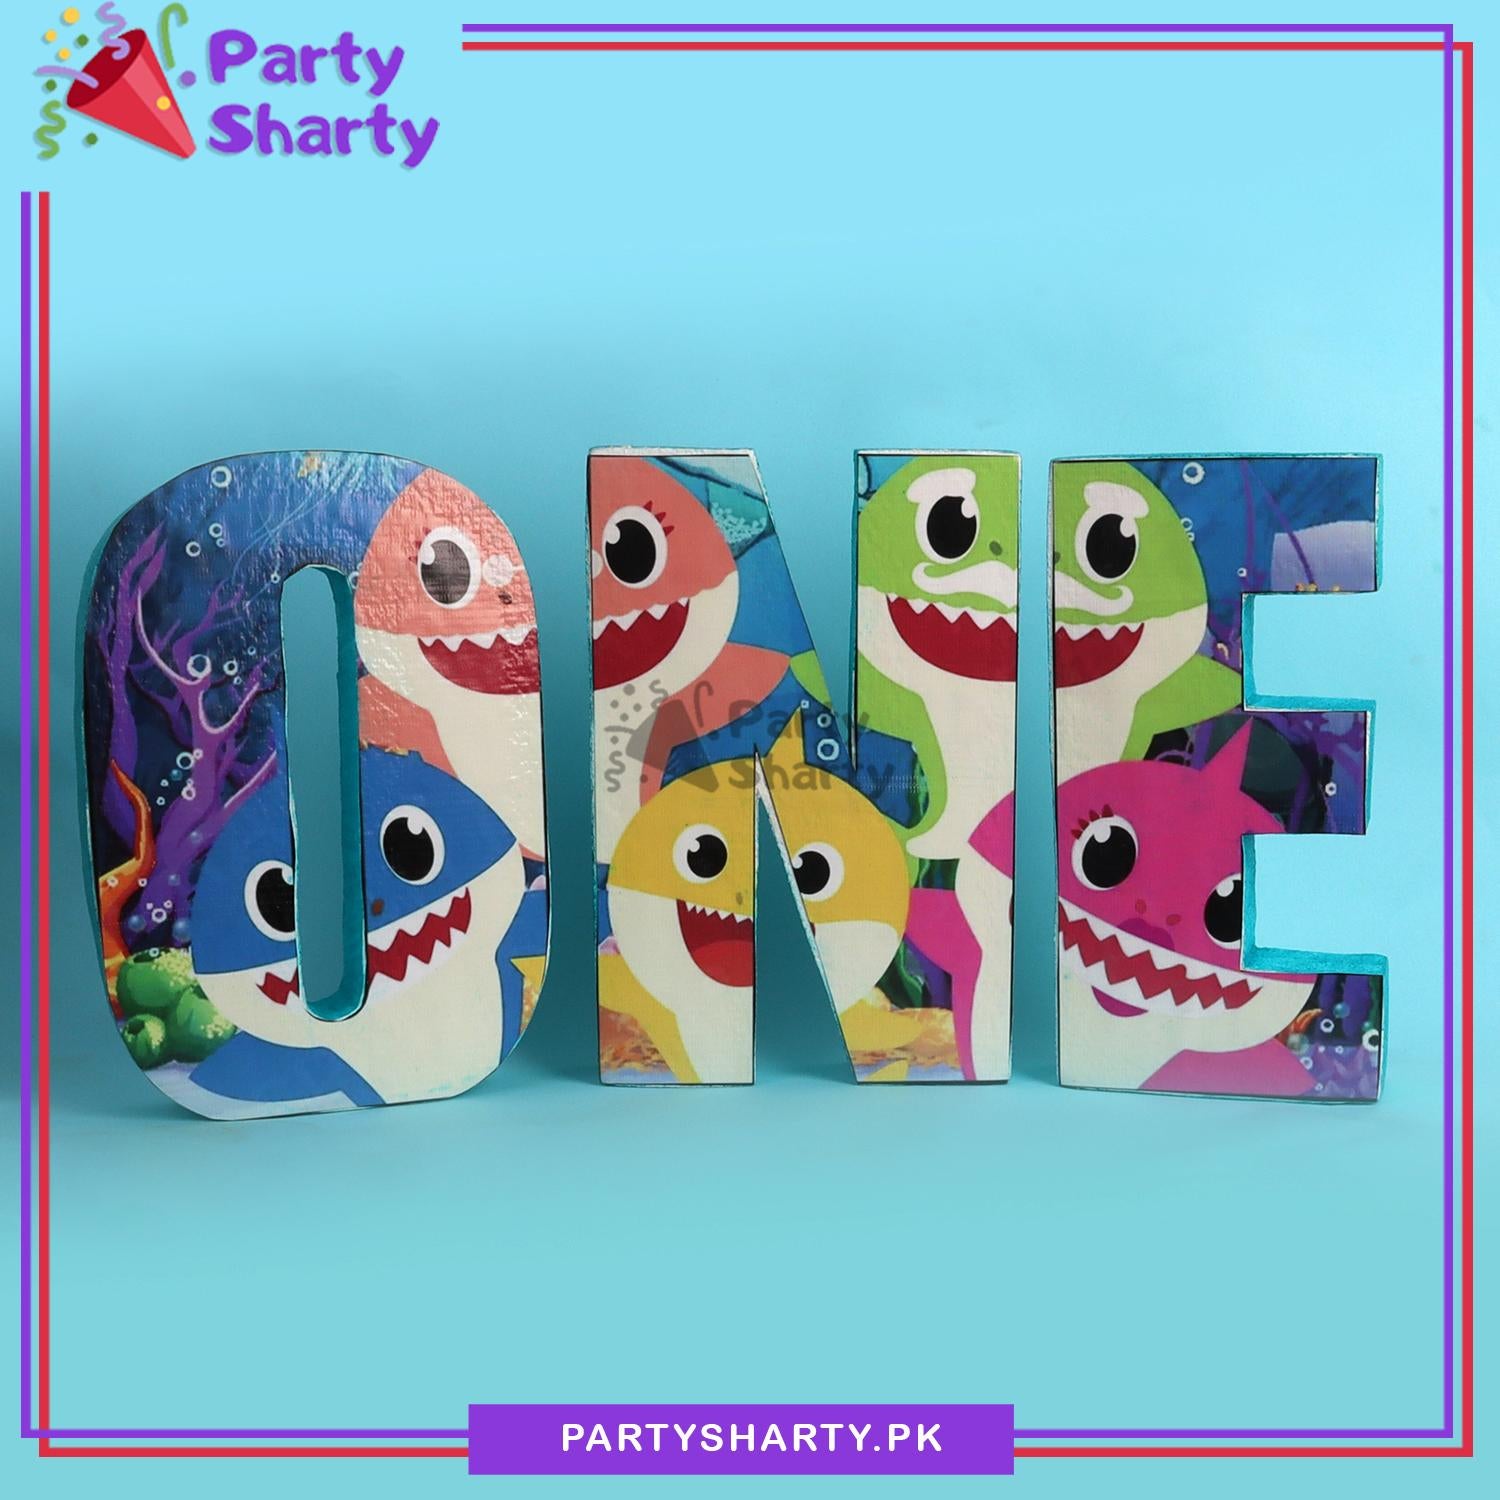 ONE Thermocol Standee For Baby Shark Theme Based First Birthday Celebration and Party Decoration